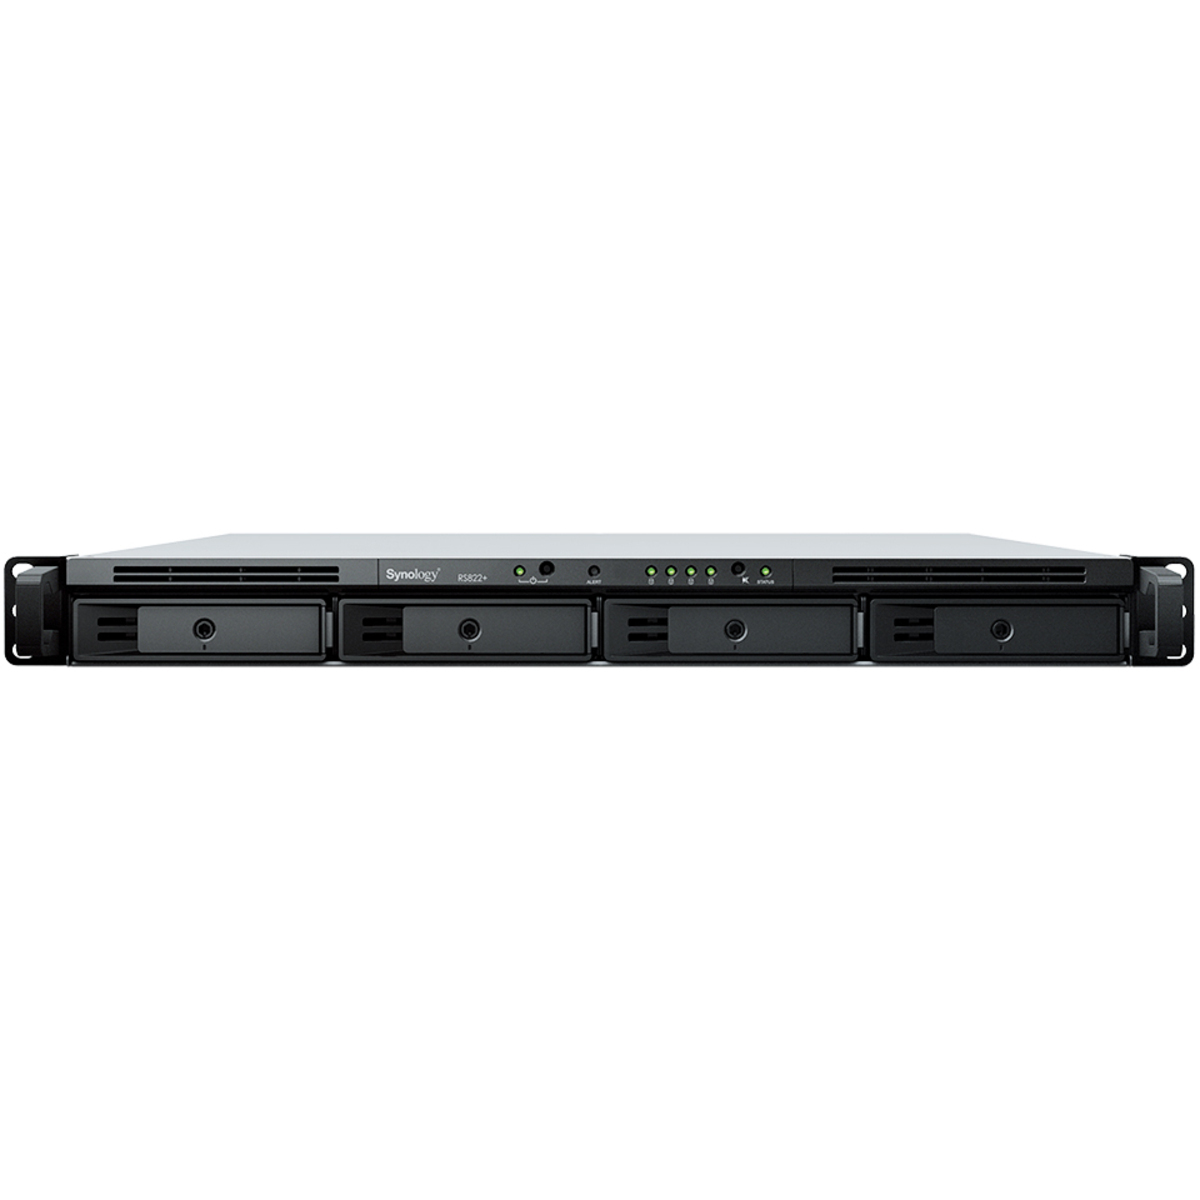 Synology RackStation RS822RP+ 64tb 4-Bay RackMount Multimedia / Power User / Business NAS - Network Attached Storage Device 4x16tb Seagate IronWolf Pro ST16000NT001 3.5 7200rpm SATA 6Gb/s HDD NAS Class Drives Installed - Burn-In Tested - ON SALE - FREE RAM UPGRADE RackStation RS822RP+